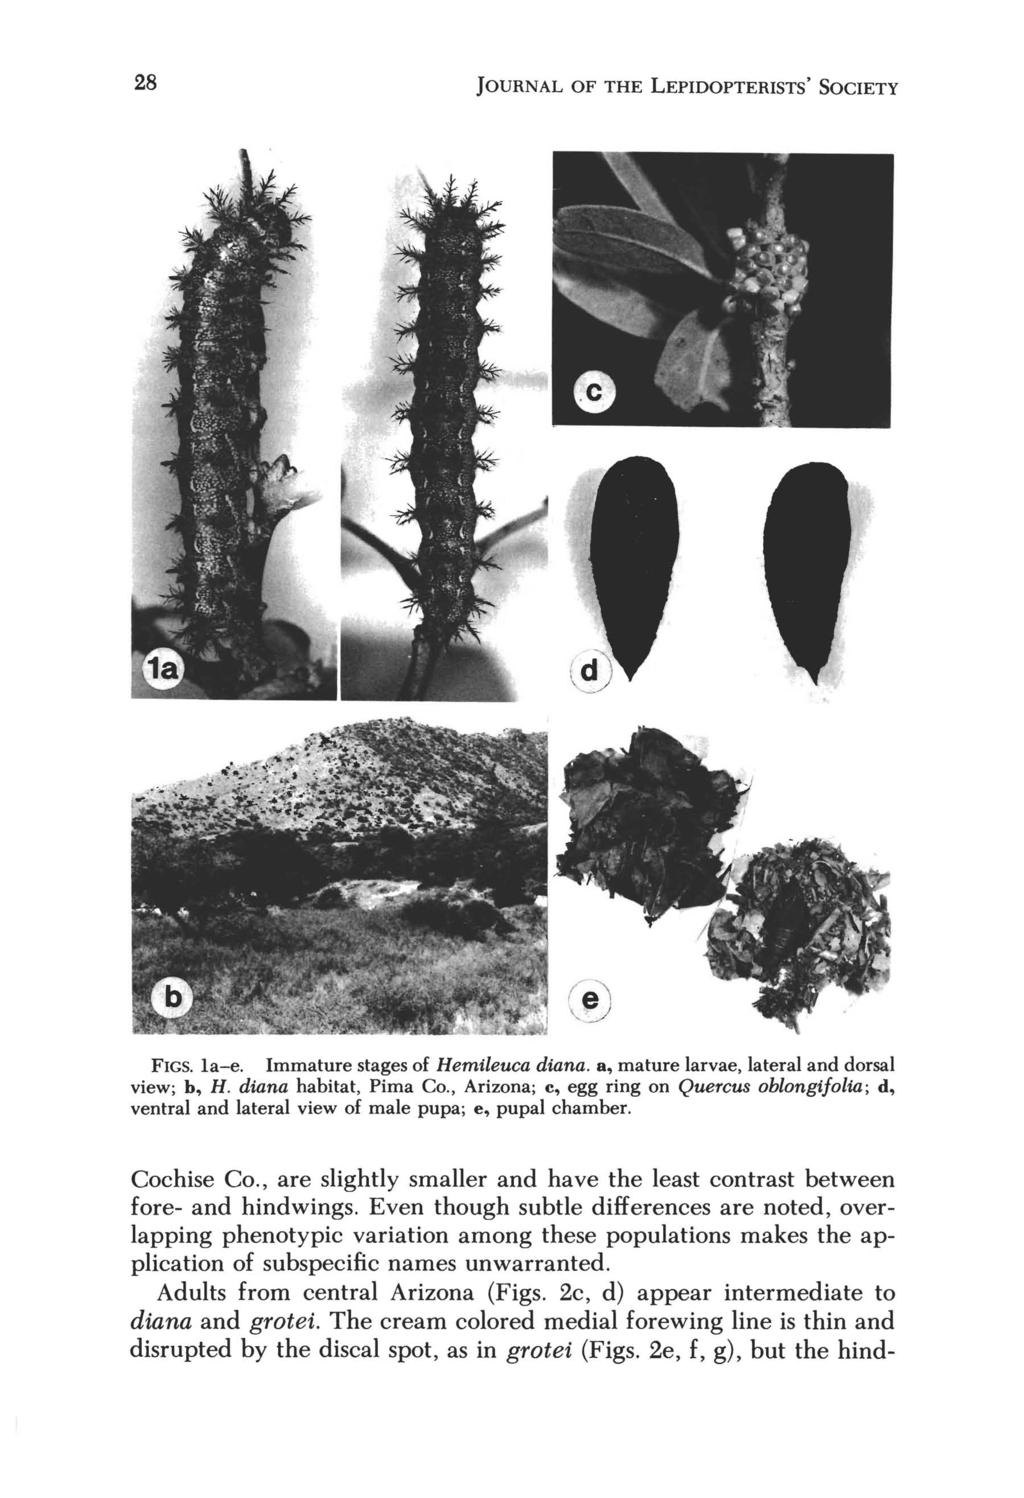 28 JOURNAL OF THE LEPIDOPTERISTS' SOCIETY FIGS. la-e. Immature stages of Hemileuca diana. a, mature larvae, lateral and dorsal view; b, H. diana habitat, Pima Co.